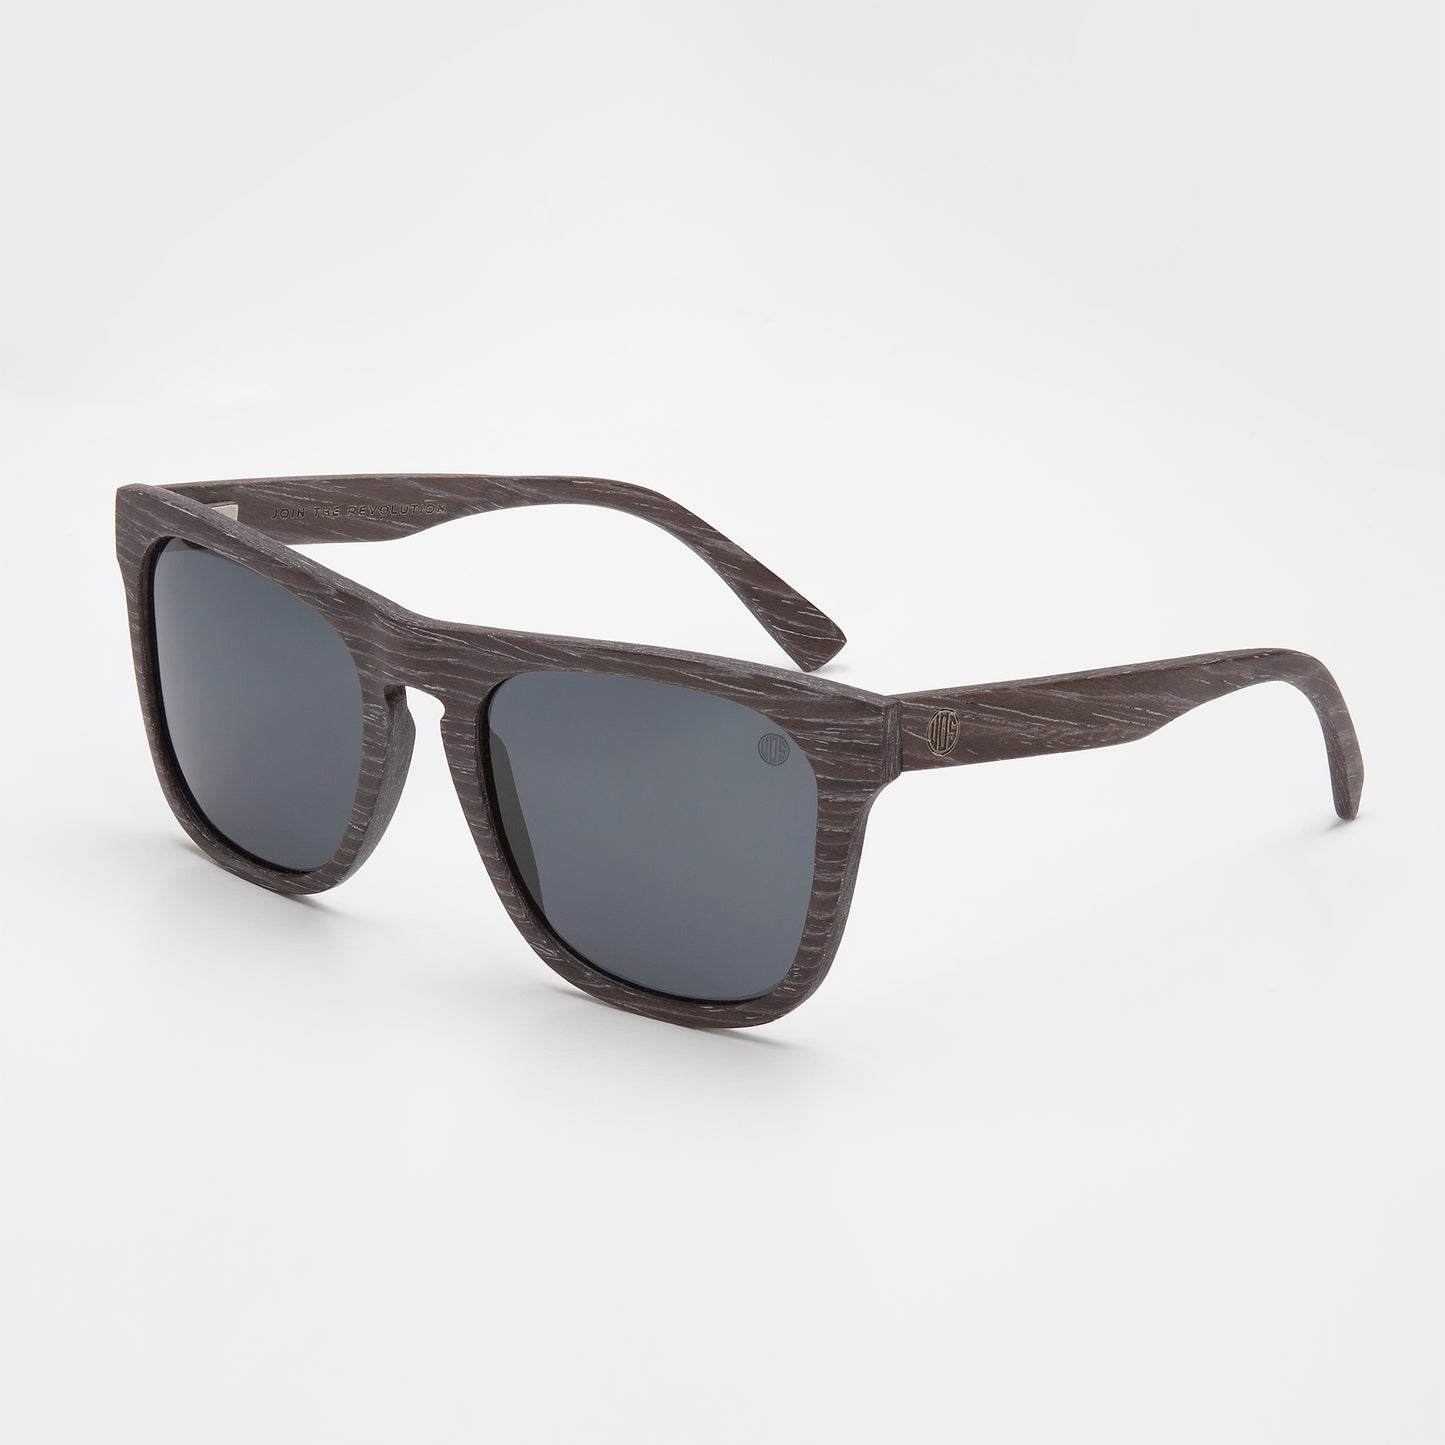 Eco Friendly SunglassesWave Hog-ToffeeWave Hog is a classic design with a splash of modern.  The laminate construction make these glasses strong but super lightweight and comfortable.  
Every pair of Wav